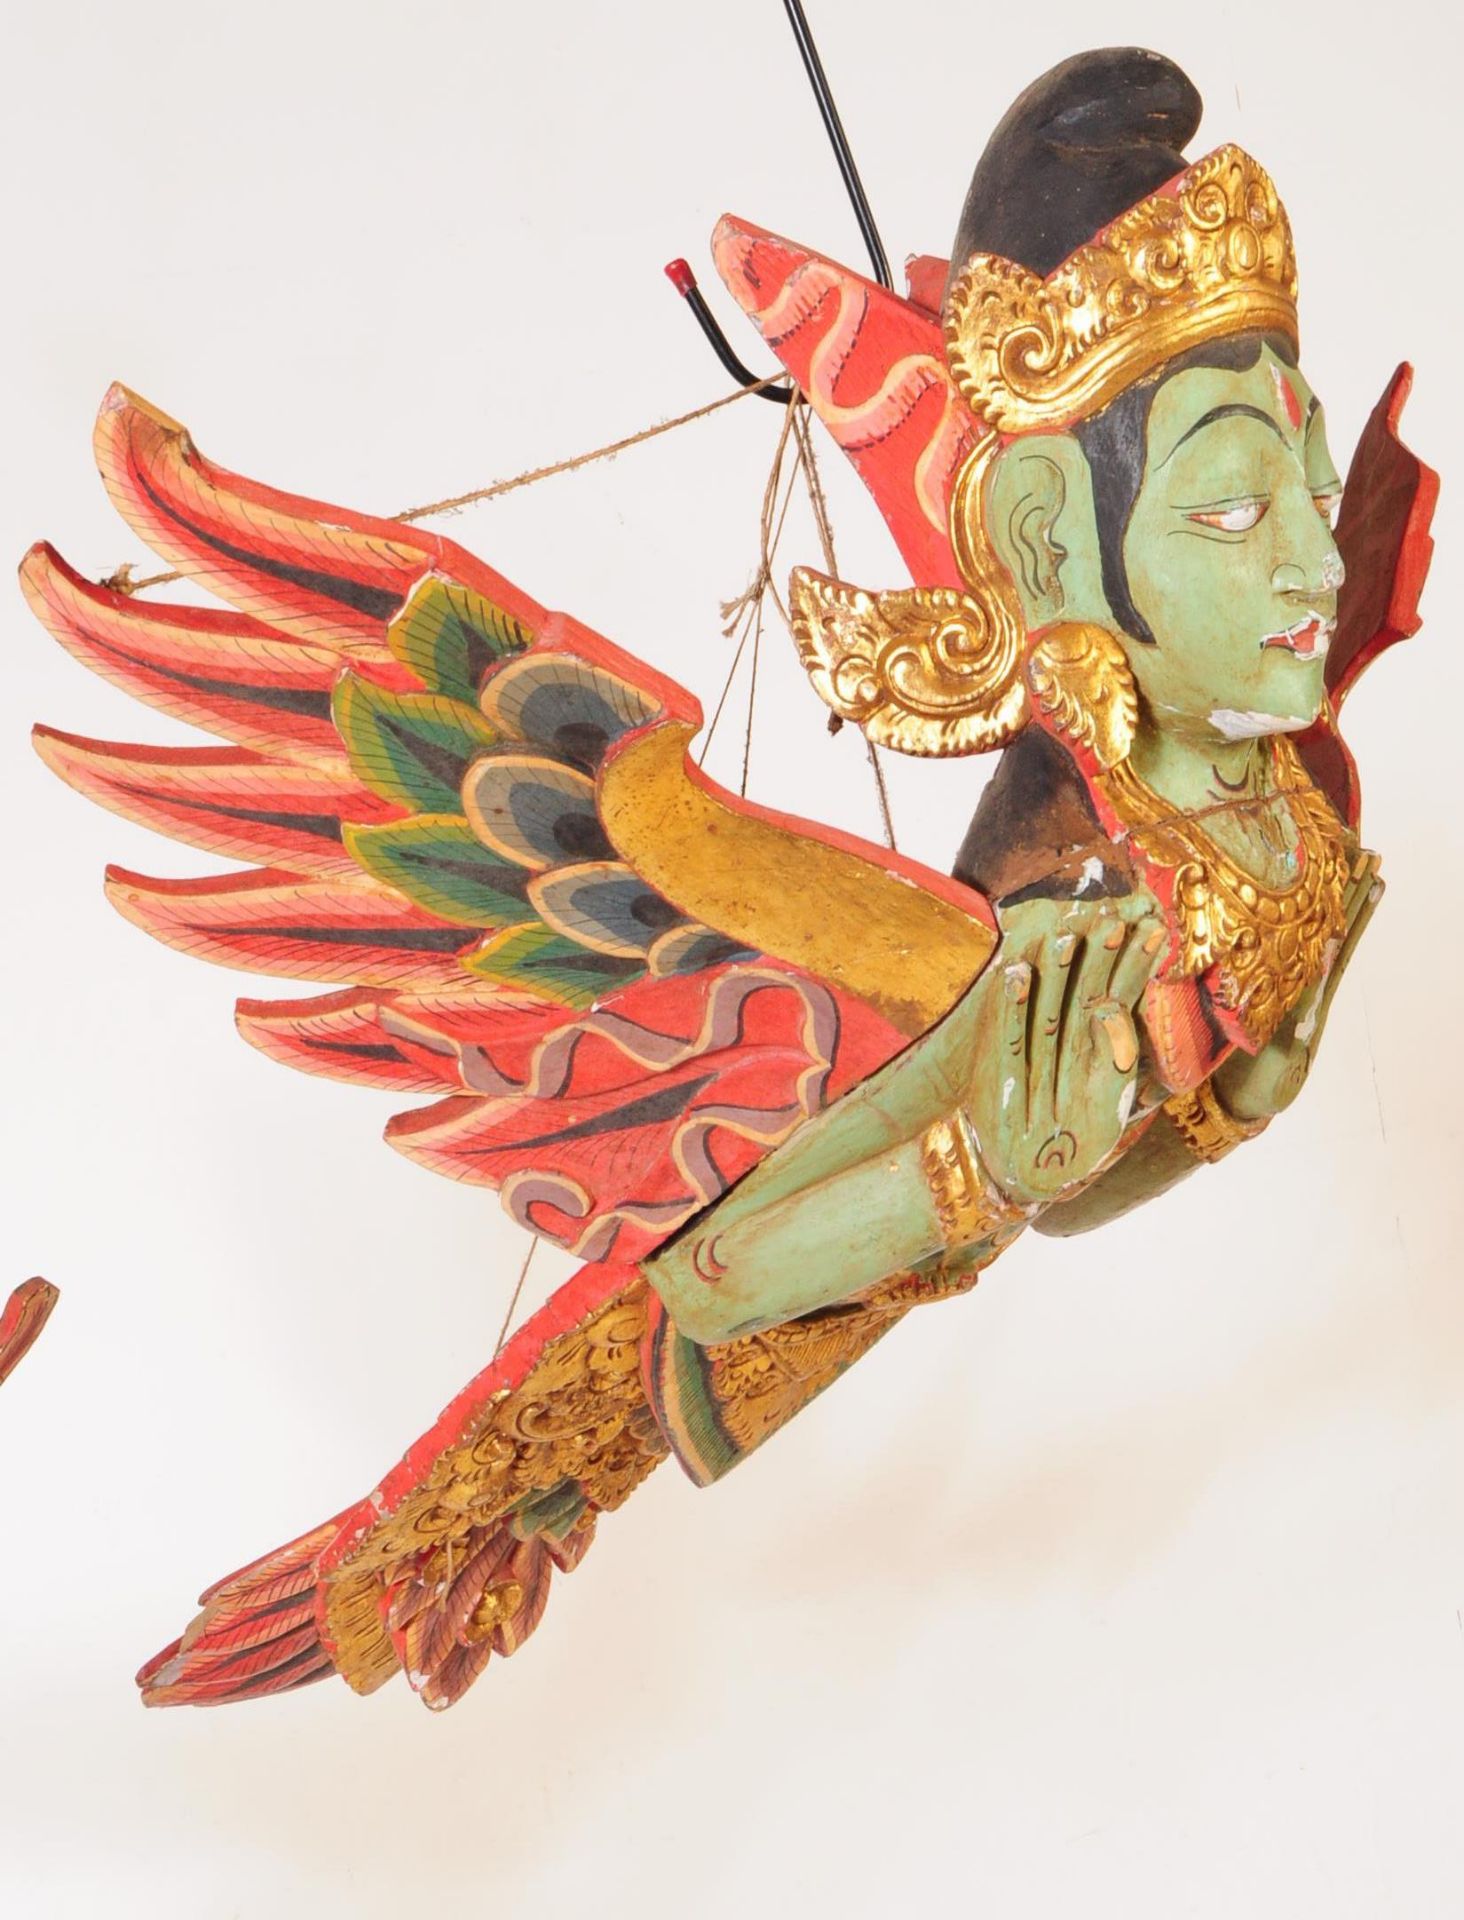 TWO MID 20TH CENTURY INDIAN AVIAN HUMANOIDS FLYING ORNAMENTS - Image 6 of 7